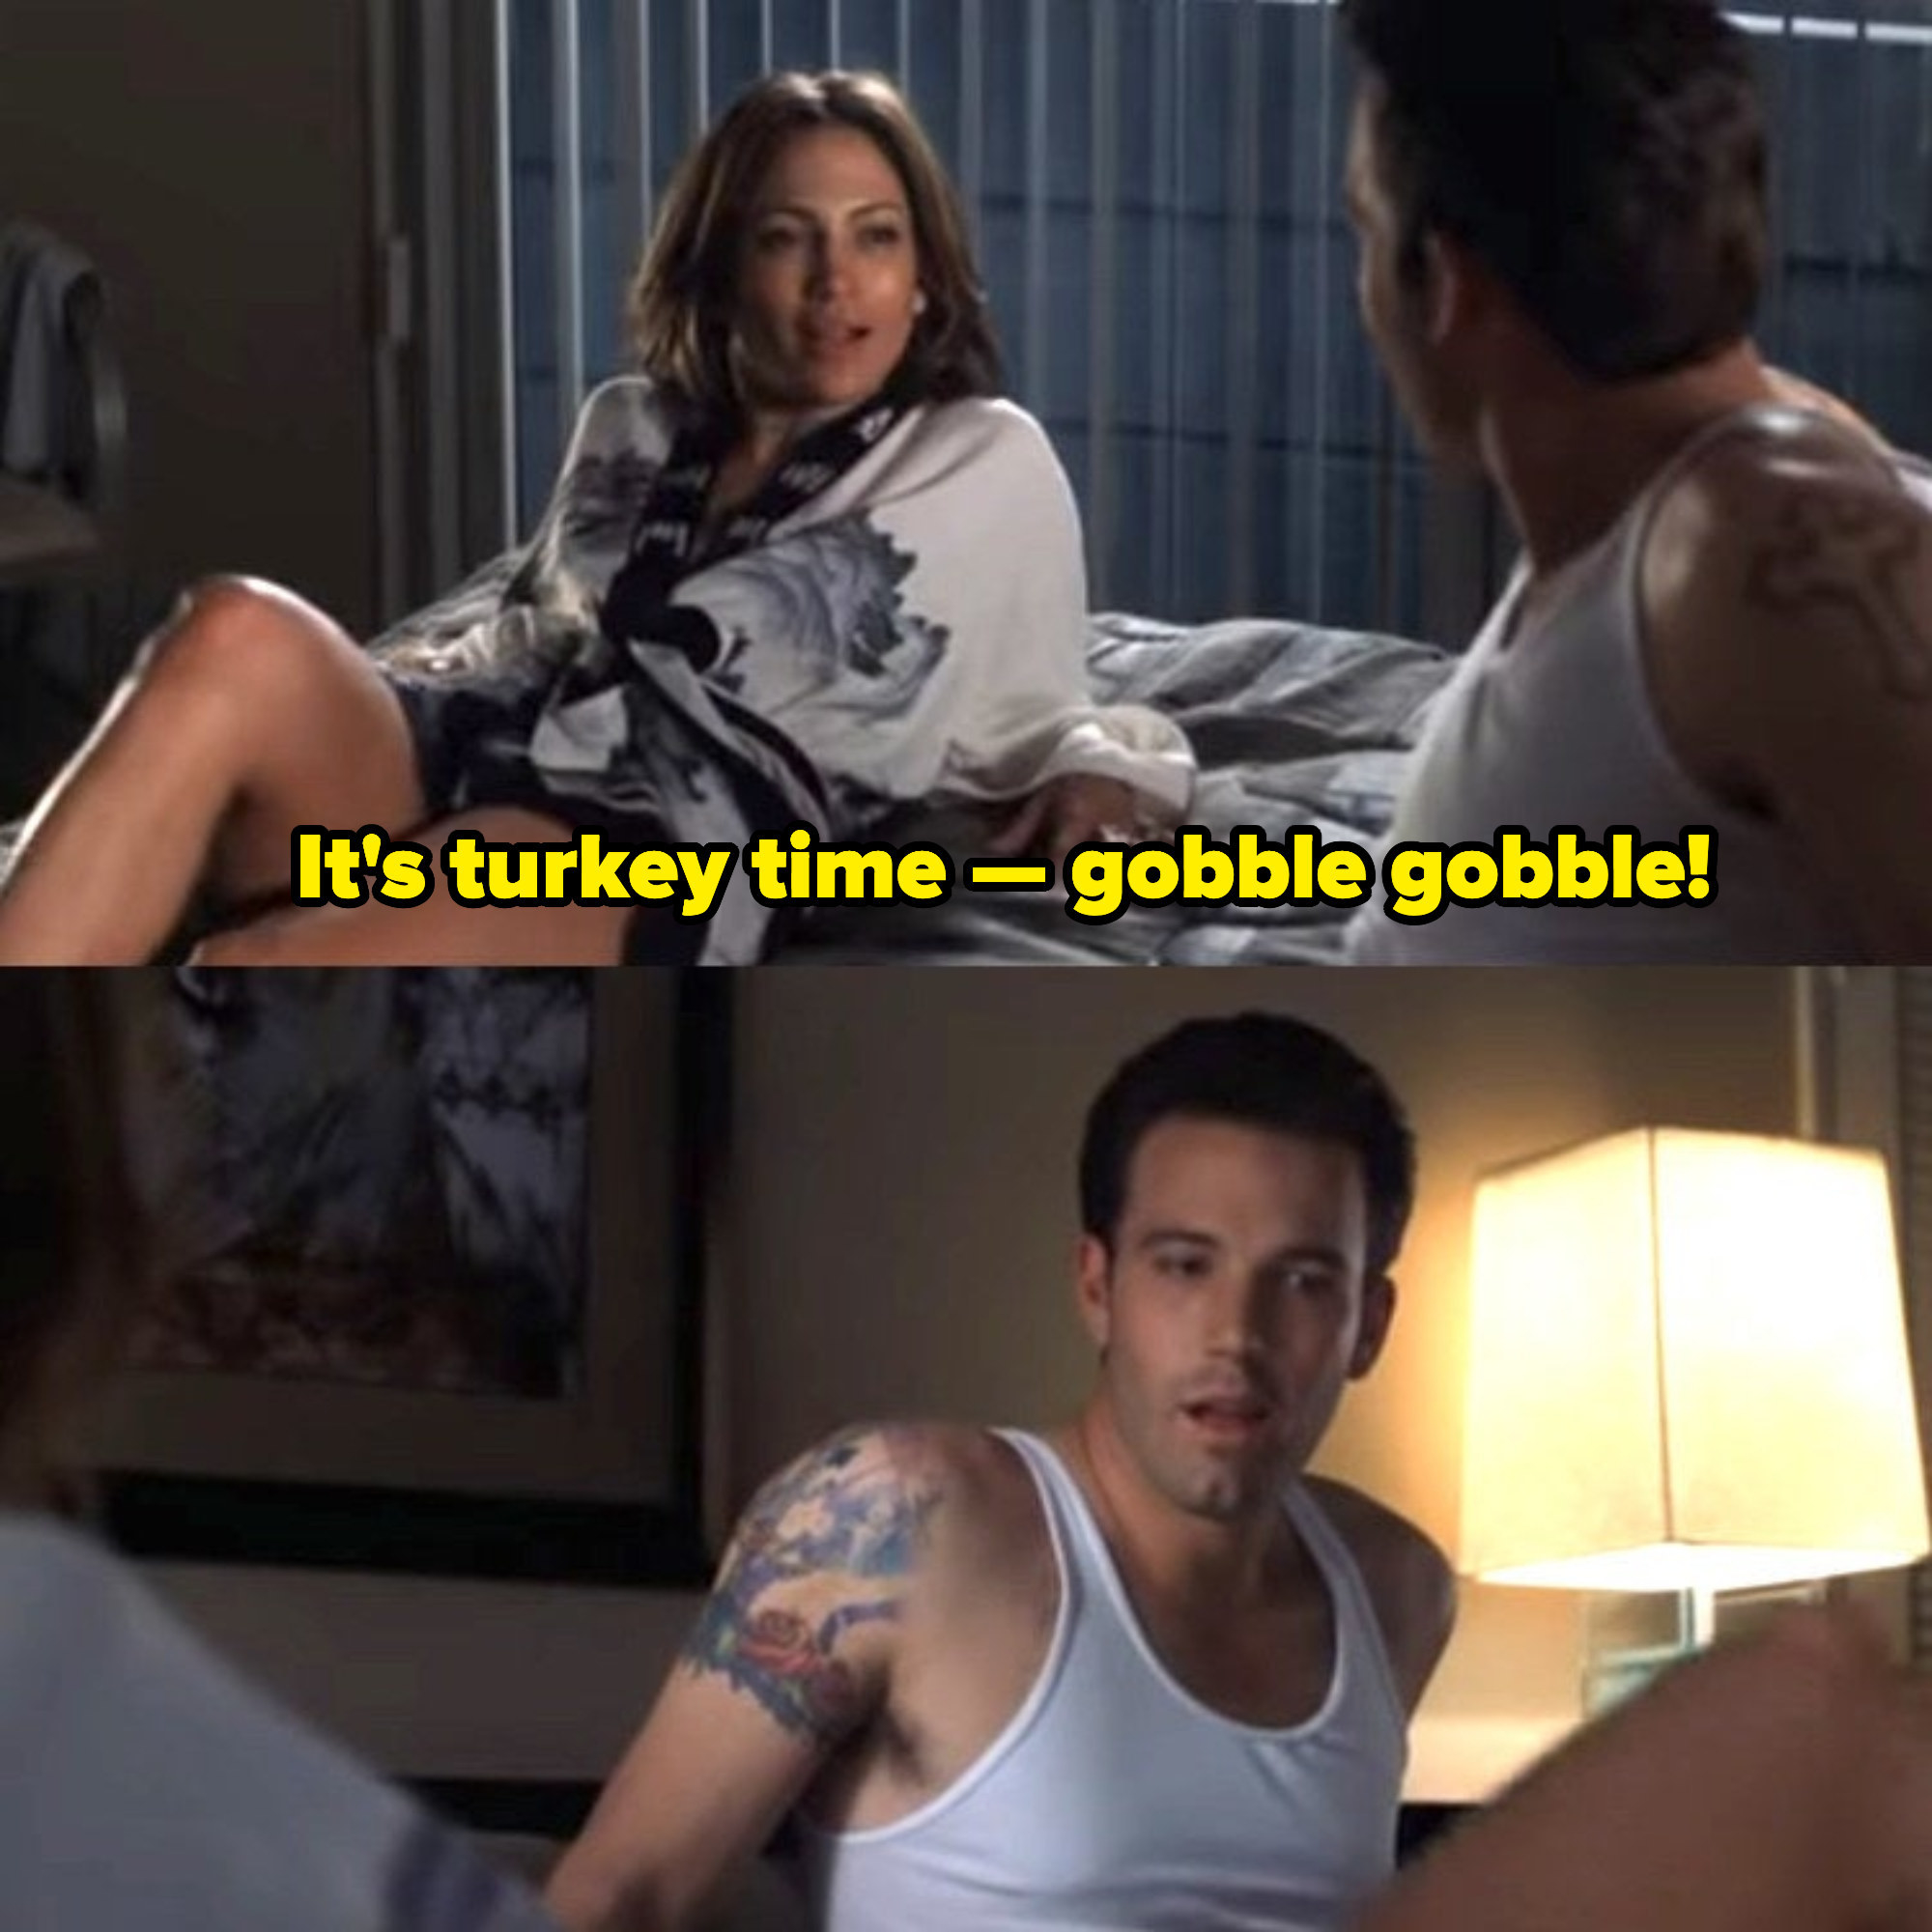 Ricki seducing Larry in &quot;Gigli&quot; by awkwardly saying: &quot;It&#x27;s turkey time -- gobble gobble!&quot;